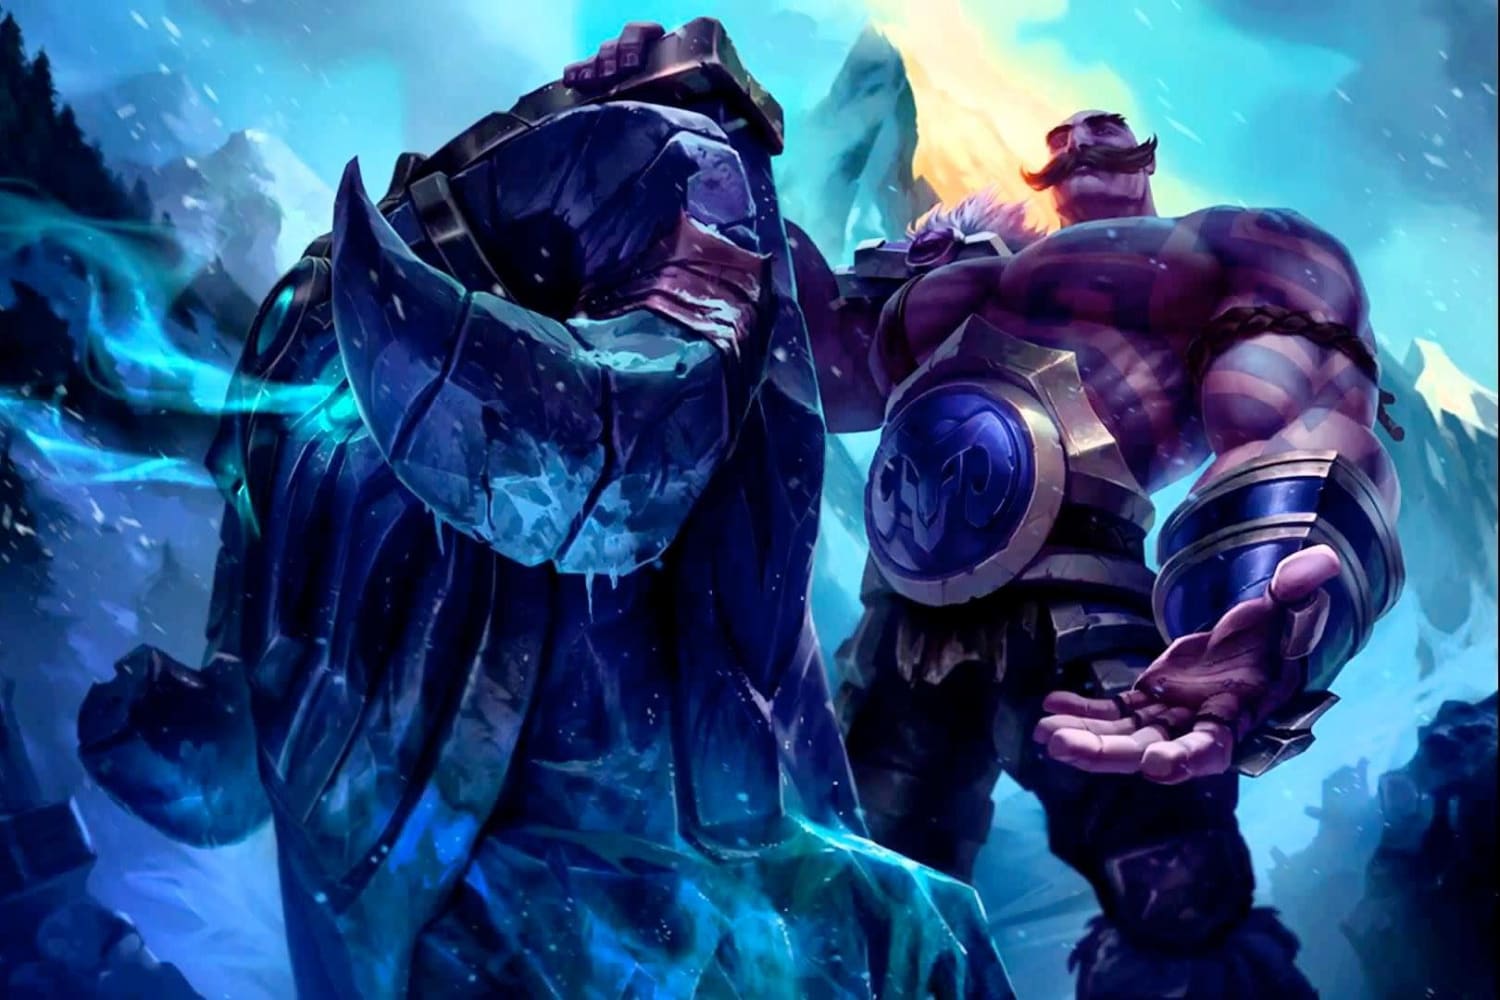 Legends of Runeterra: How to level up your champions - Dot Esports